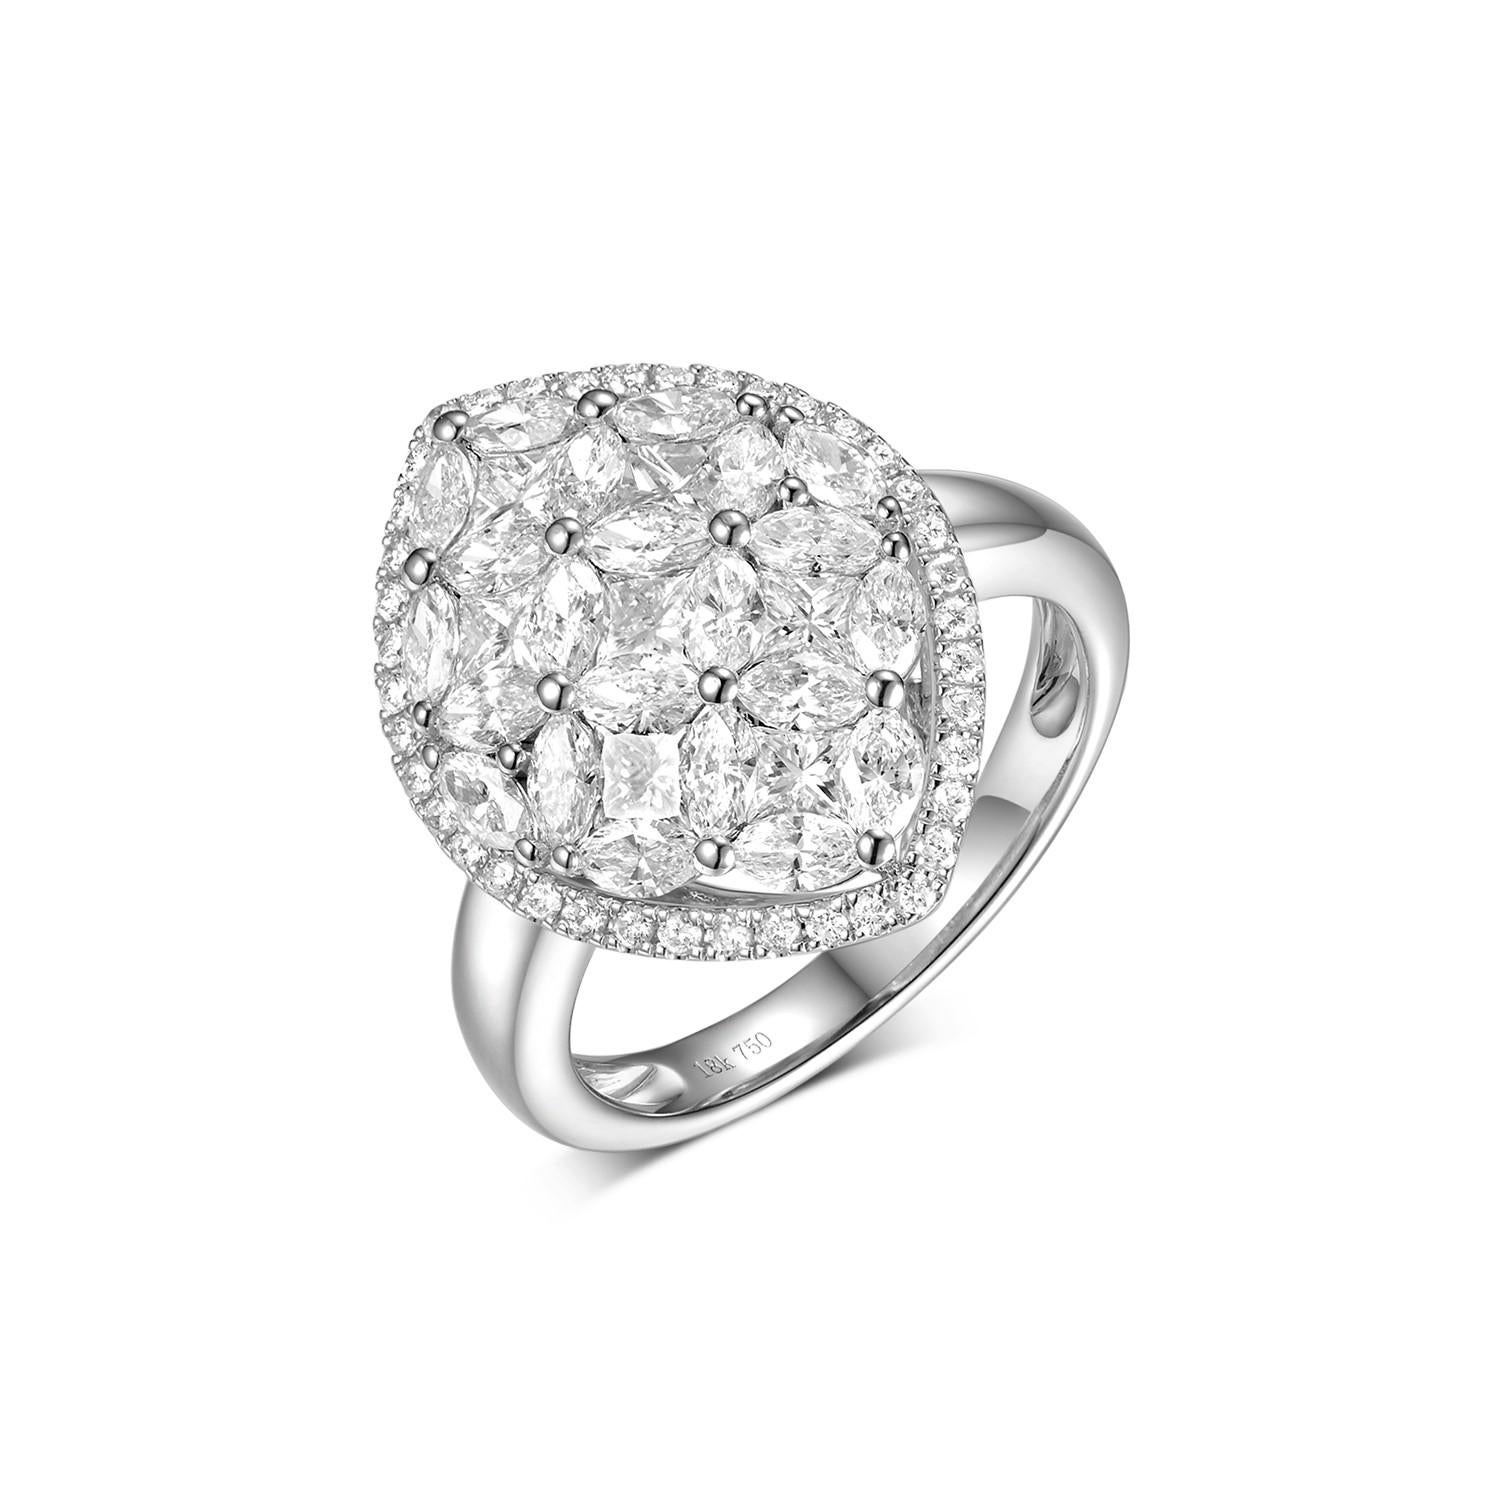 This ring features 7 princess cut diamonds weight 0.67 carat; 22 pear cut diamonds weight 1.19 carat.  White round diamonds weight 0.24 carat in total. Ring is set in 18 karat white gold.

US 6.5
Resizing is available
Princess Cut Diamonds 0.67